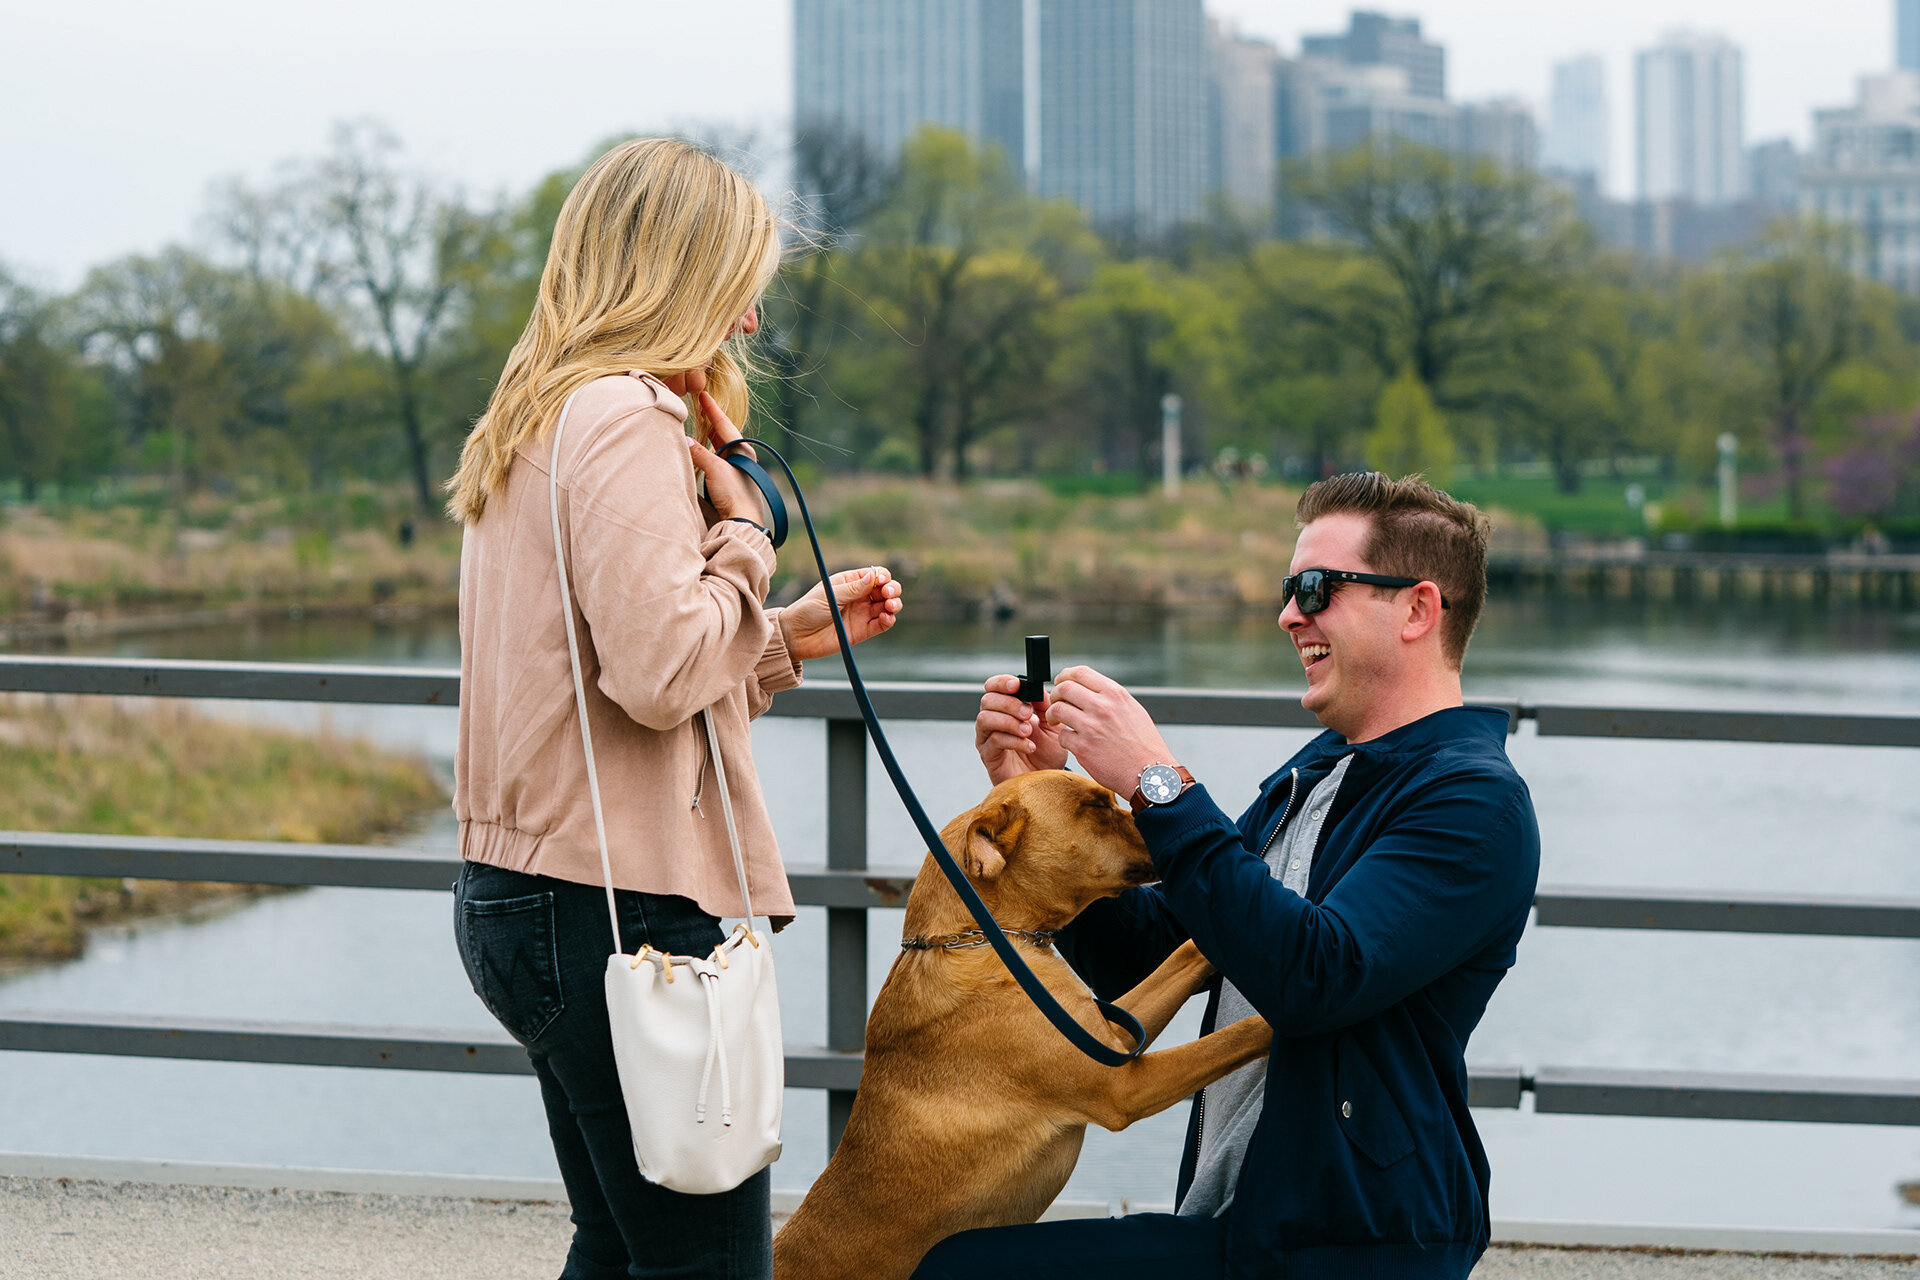 Proposal in LIncoln Park, Chicago Illinois